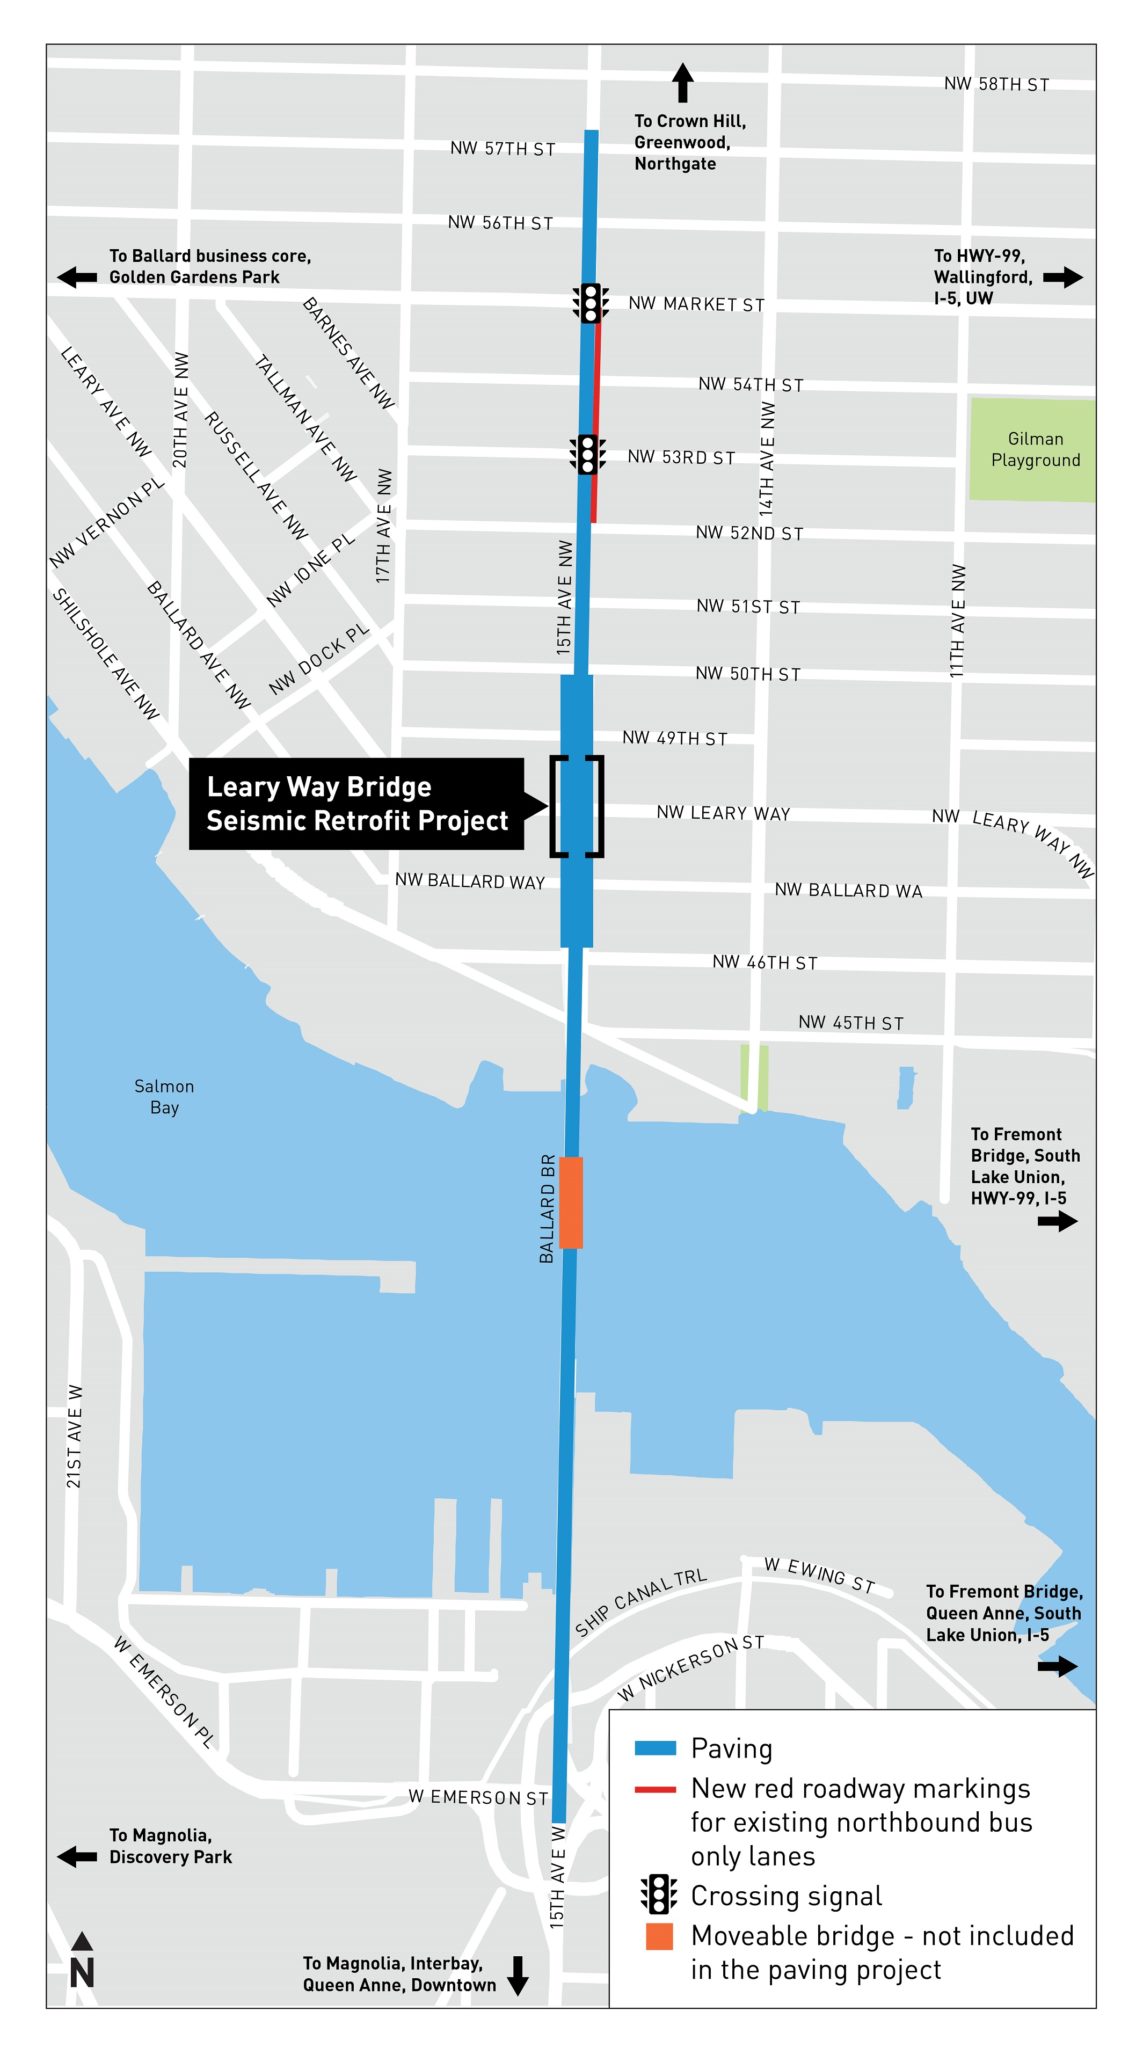 Map of the project area from NW 57th St in Ballard to W Emerson St in Interbay. The area of repaving along 15th Ave W/NW is shown in a blue line, with the Ballard Bridge in an orange bar. The Leary Way Bridge seismic retrofit is shown with black brackets, north of the Ballard Bridge.